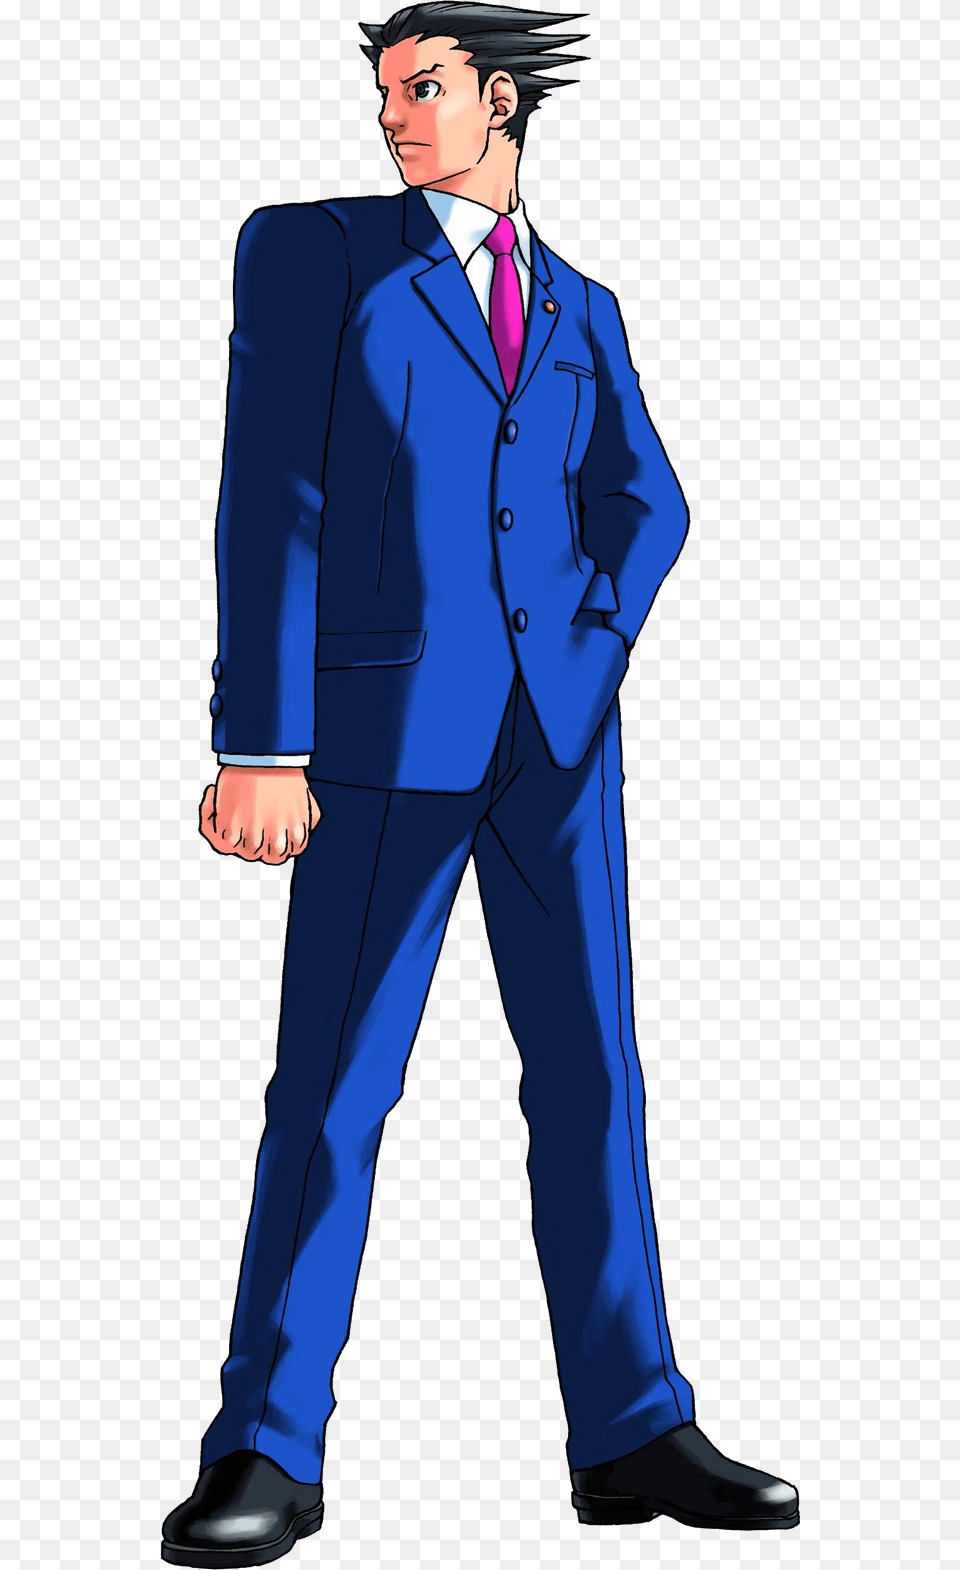 Phoenix Wright All Phoenix Wright Costumes, Tuxedo, Clothing, Suit, Formal Wear Free Png Download